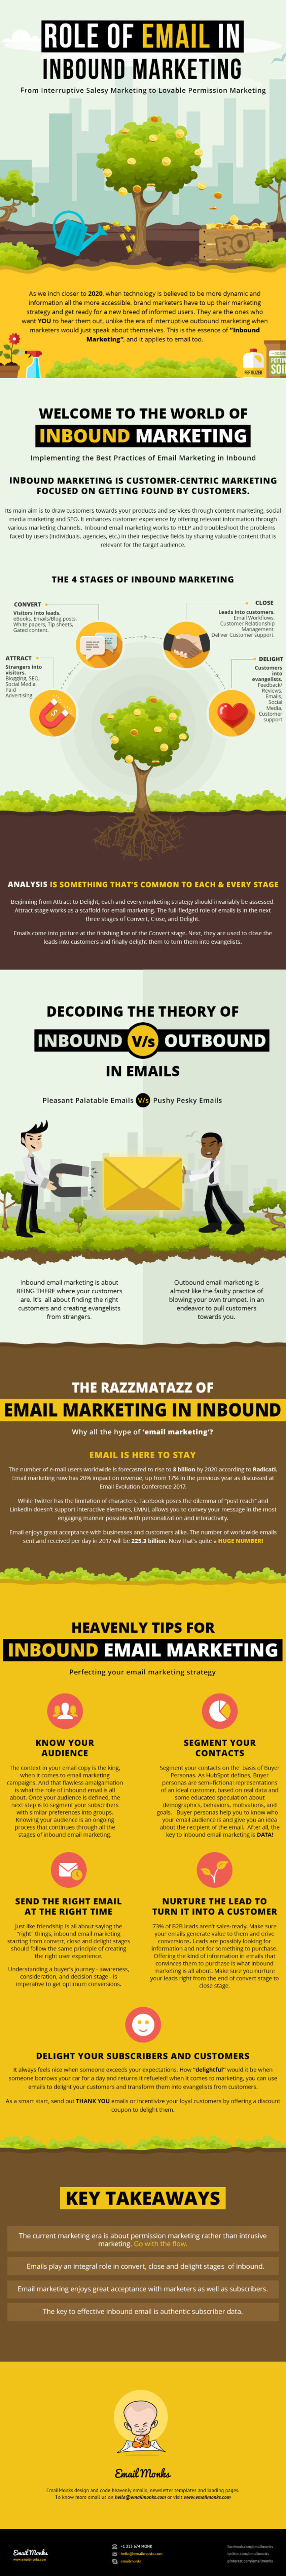 Email for Inbound Marketing: Best-Practices and Tips [Infographic] - EmailMonks via MarketingProfs | The MarTech Digest | Scoop.it